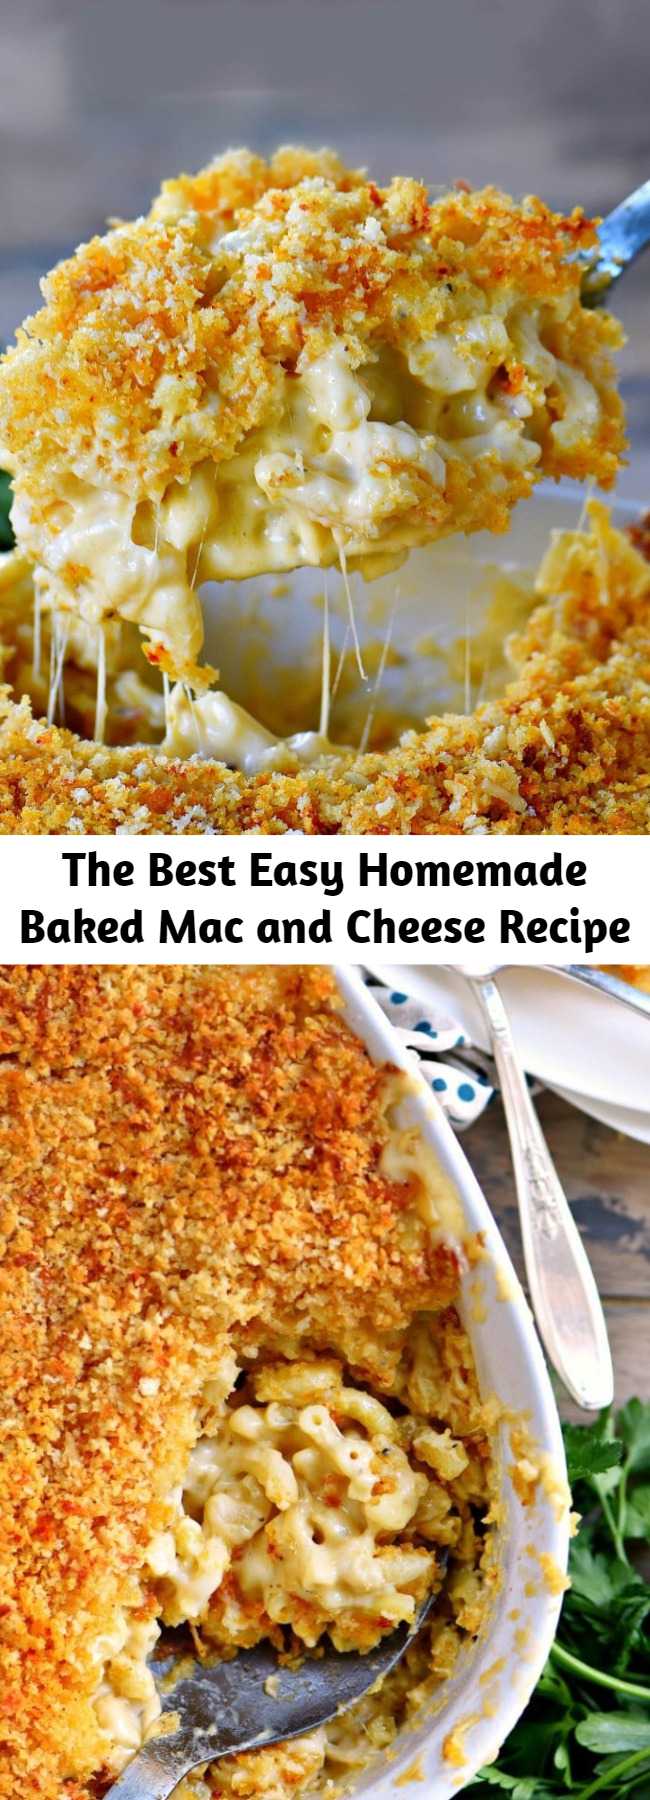 The Best Easy Homemade Baked Mac and Cheese Recipe - The BEST Homemade Mac and Cheese of your LIFE. Outrageously cheesy, ultra creamy, and topped with a crunchy Panko-Parmesan topping, this mac and cheese recipe is most definitely a keeper. I used three different cheese and a homemade cheese sauce to take this macaroni and cheese recipe over the top. #recipe #recipes #dinner #cheesy #macandcheese #macaroni #entree #kidfriendly